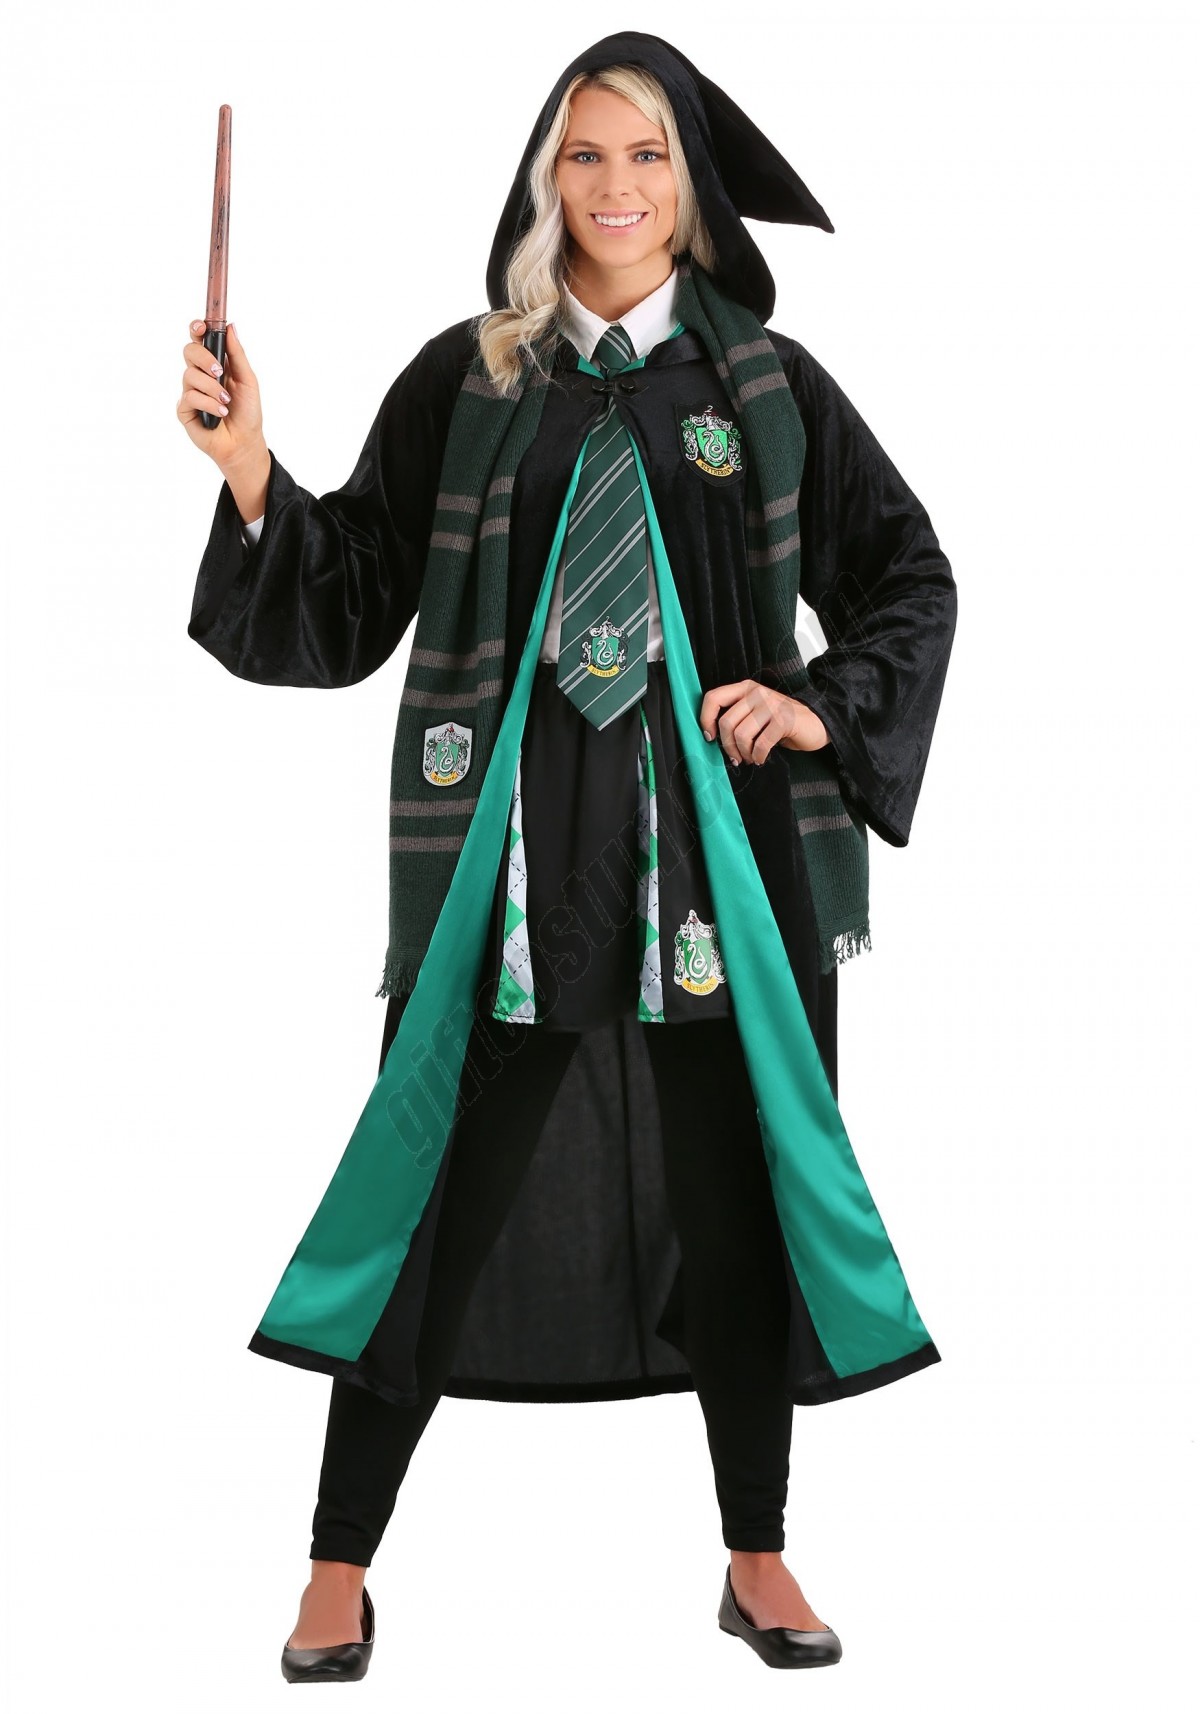 Harry Potter Deluxe Slytherin Robe Costume for Adults - Men's - -6